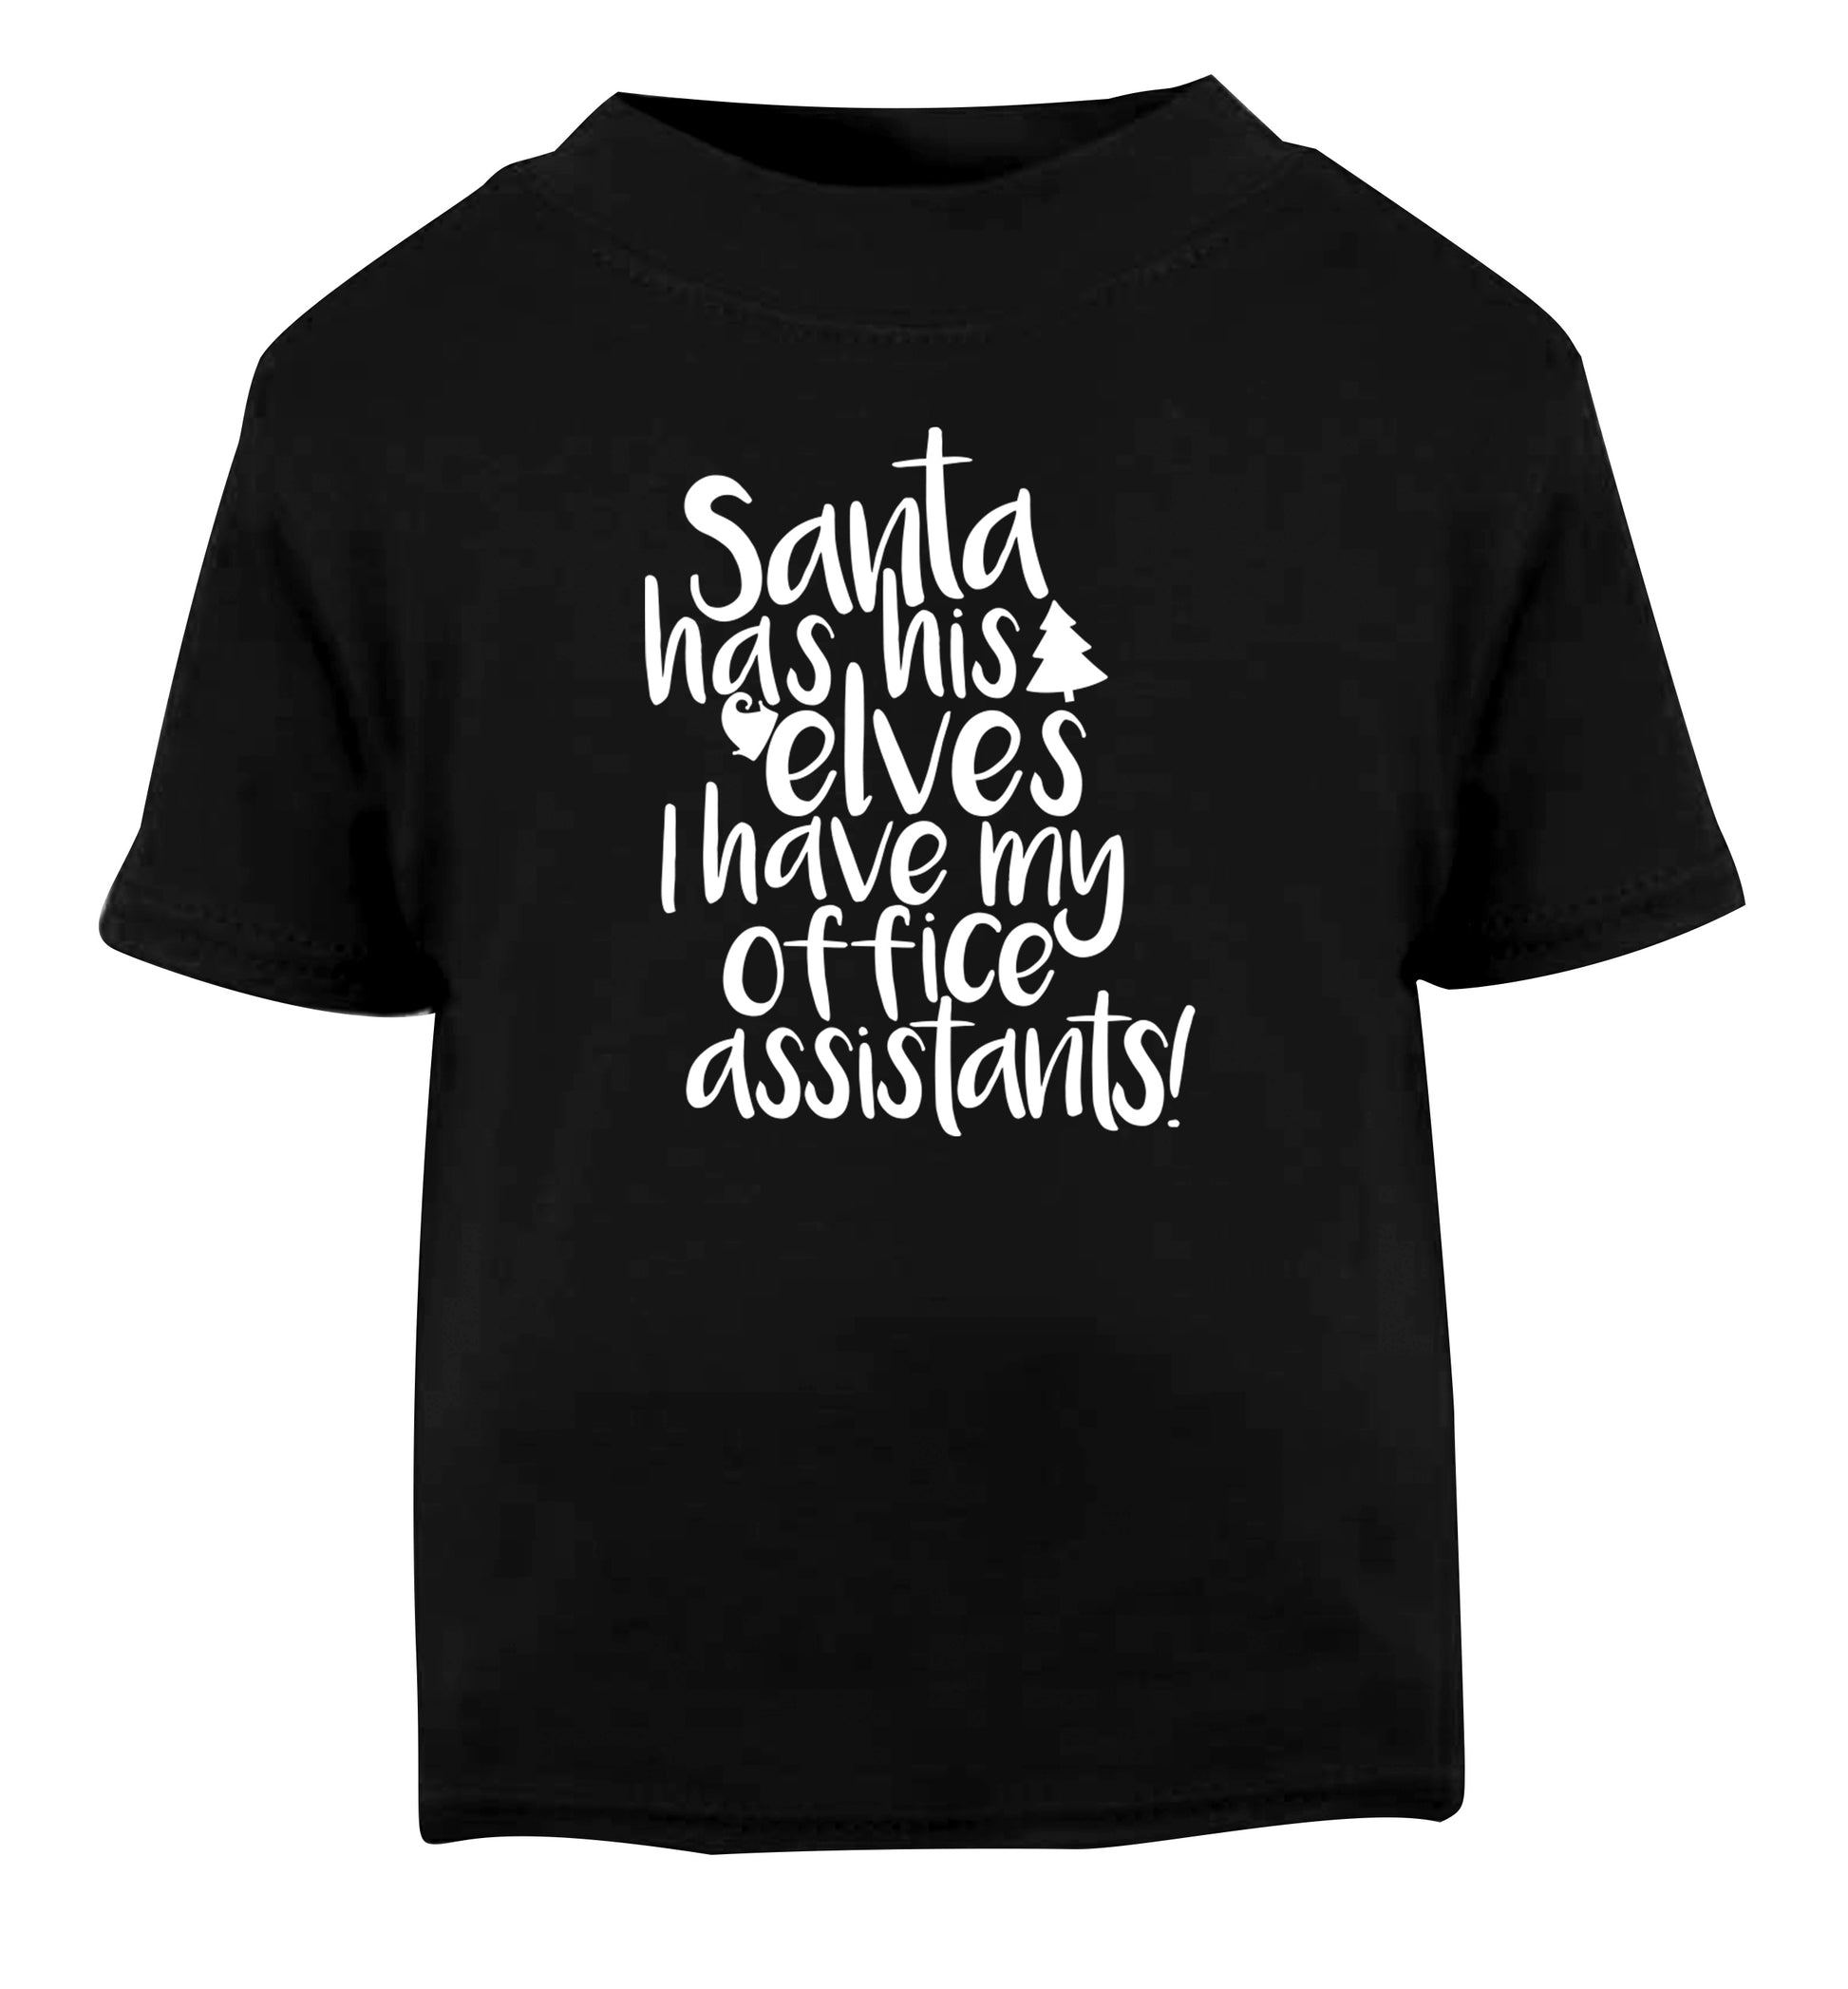 Santa has elves I have office assistants Black Baby Toddler Tshirt 2 years